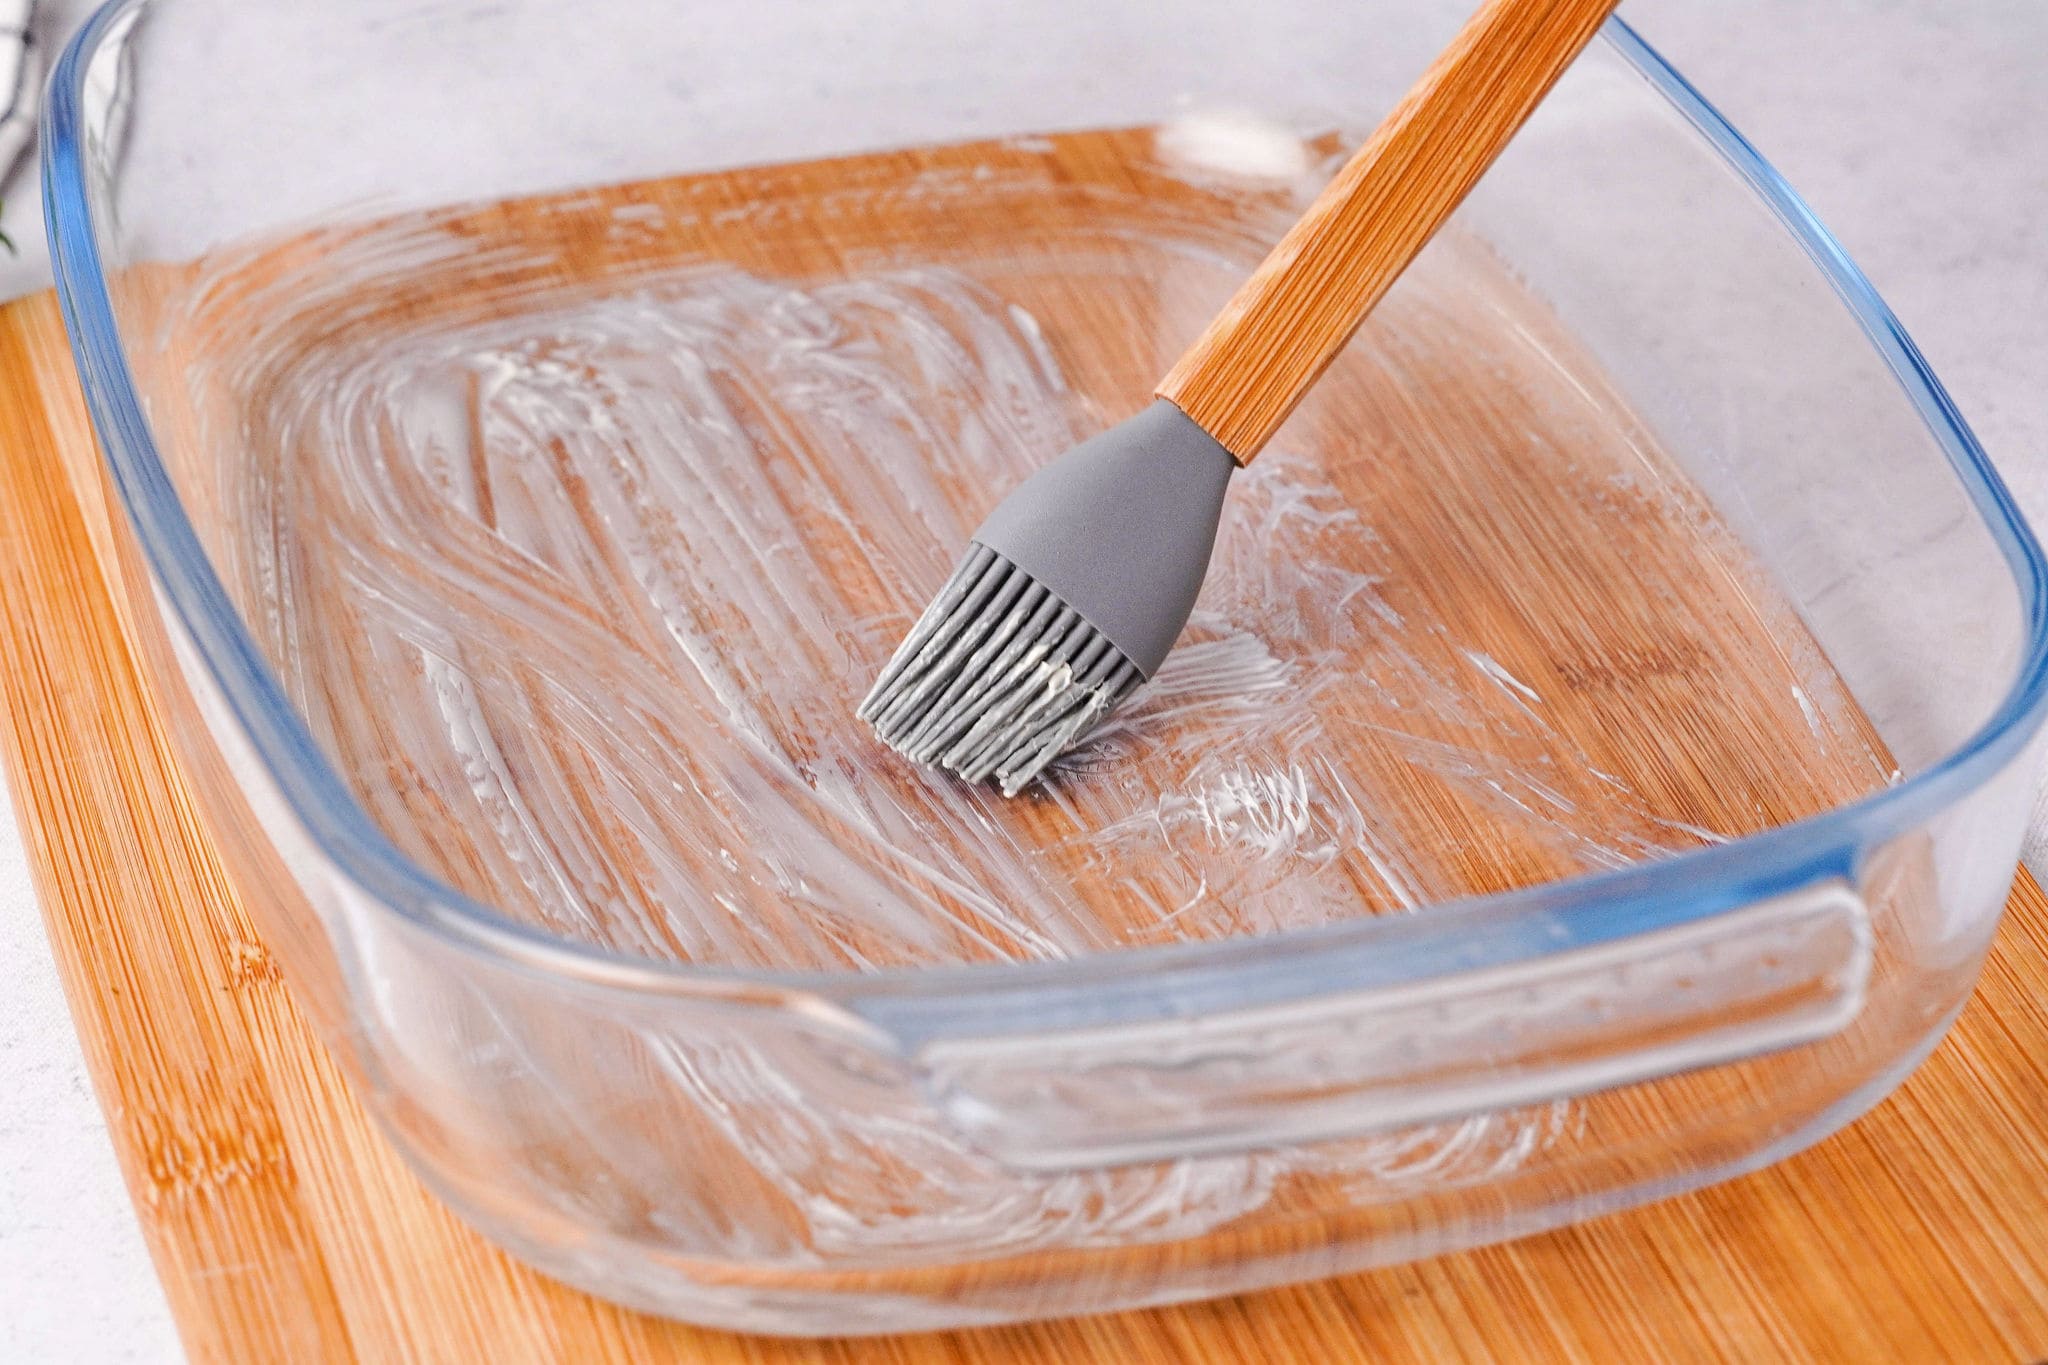 greasing baking dish with butter